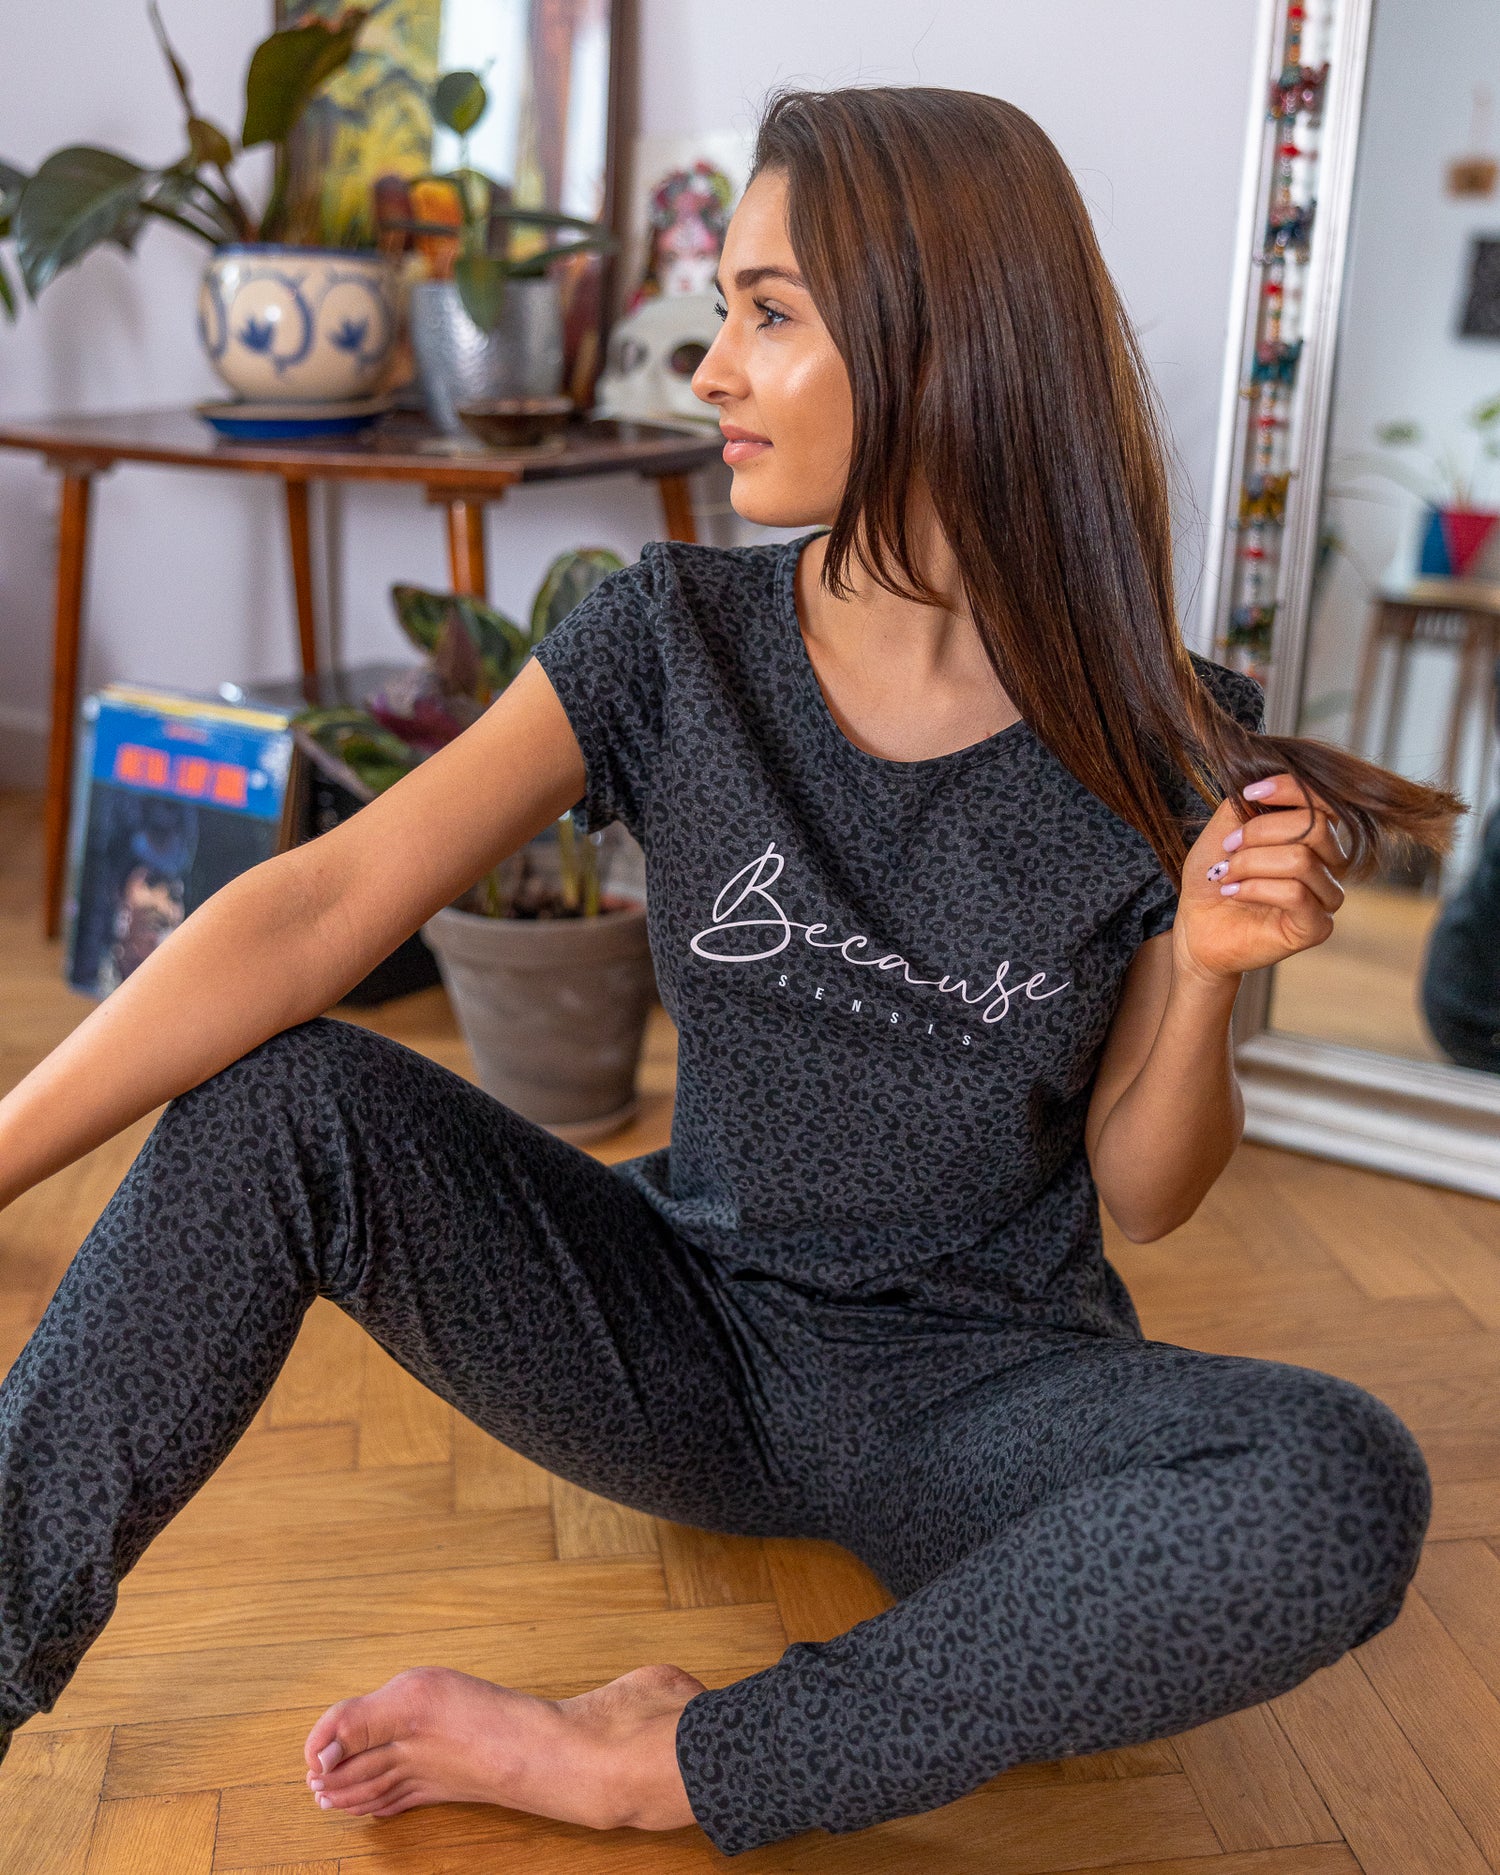 A Brunette female sitting on hardwood floor wearing Two piece outfit set  Cotton-Blend Short Sleeve Top  Leopard Print Pattern  Soft Casual T-shirt  Long Pant Jogger  Cuff Ankles  Adjustable Satin Bow Tie  Sustainable pyjama set  Eco-conscious lounge Wear 